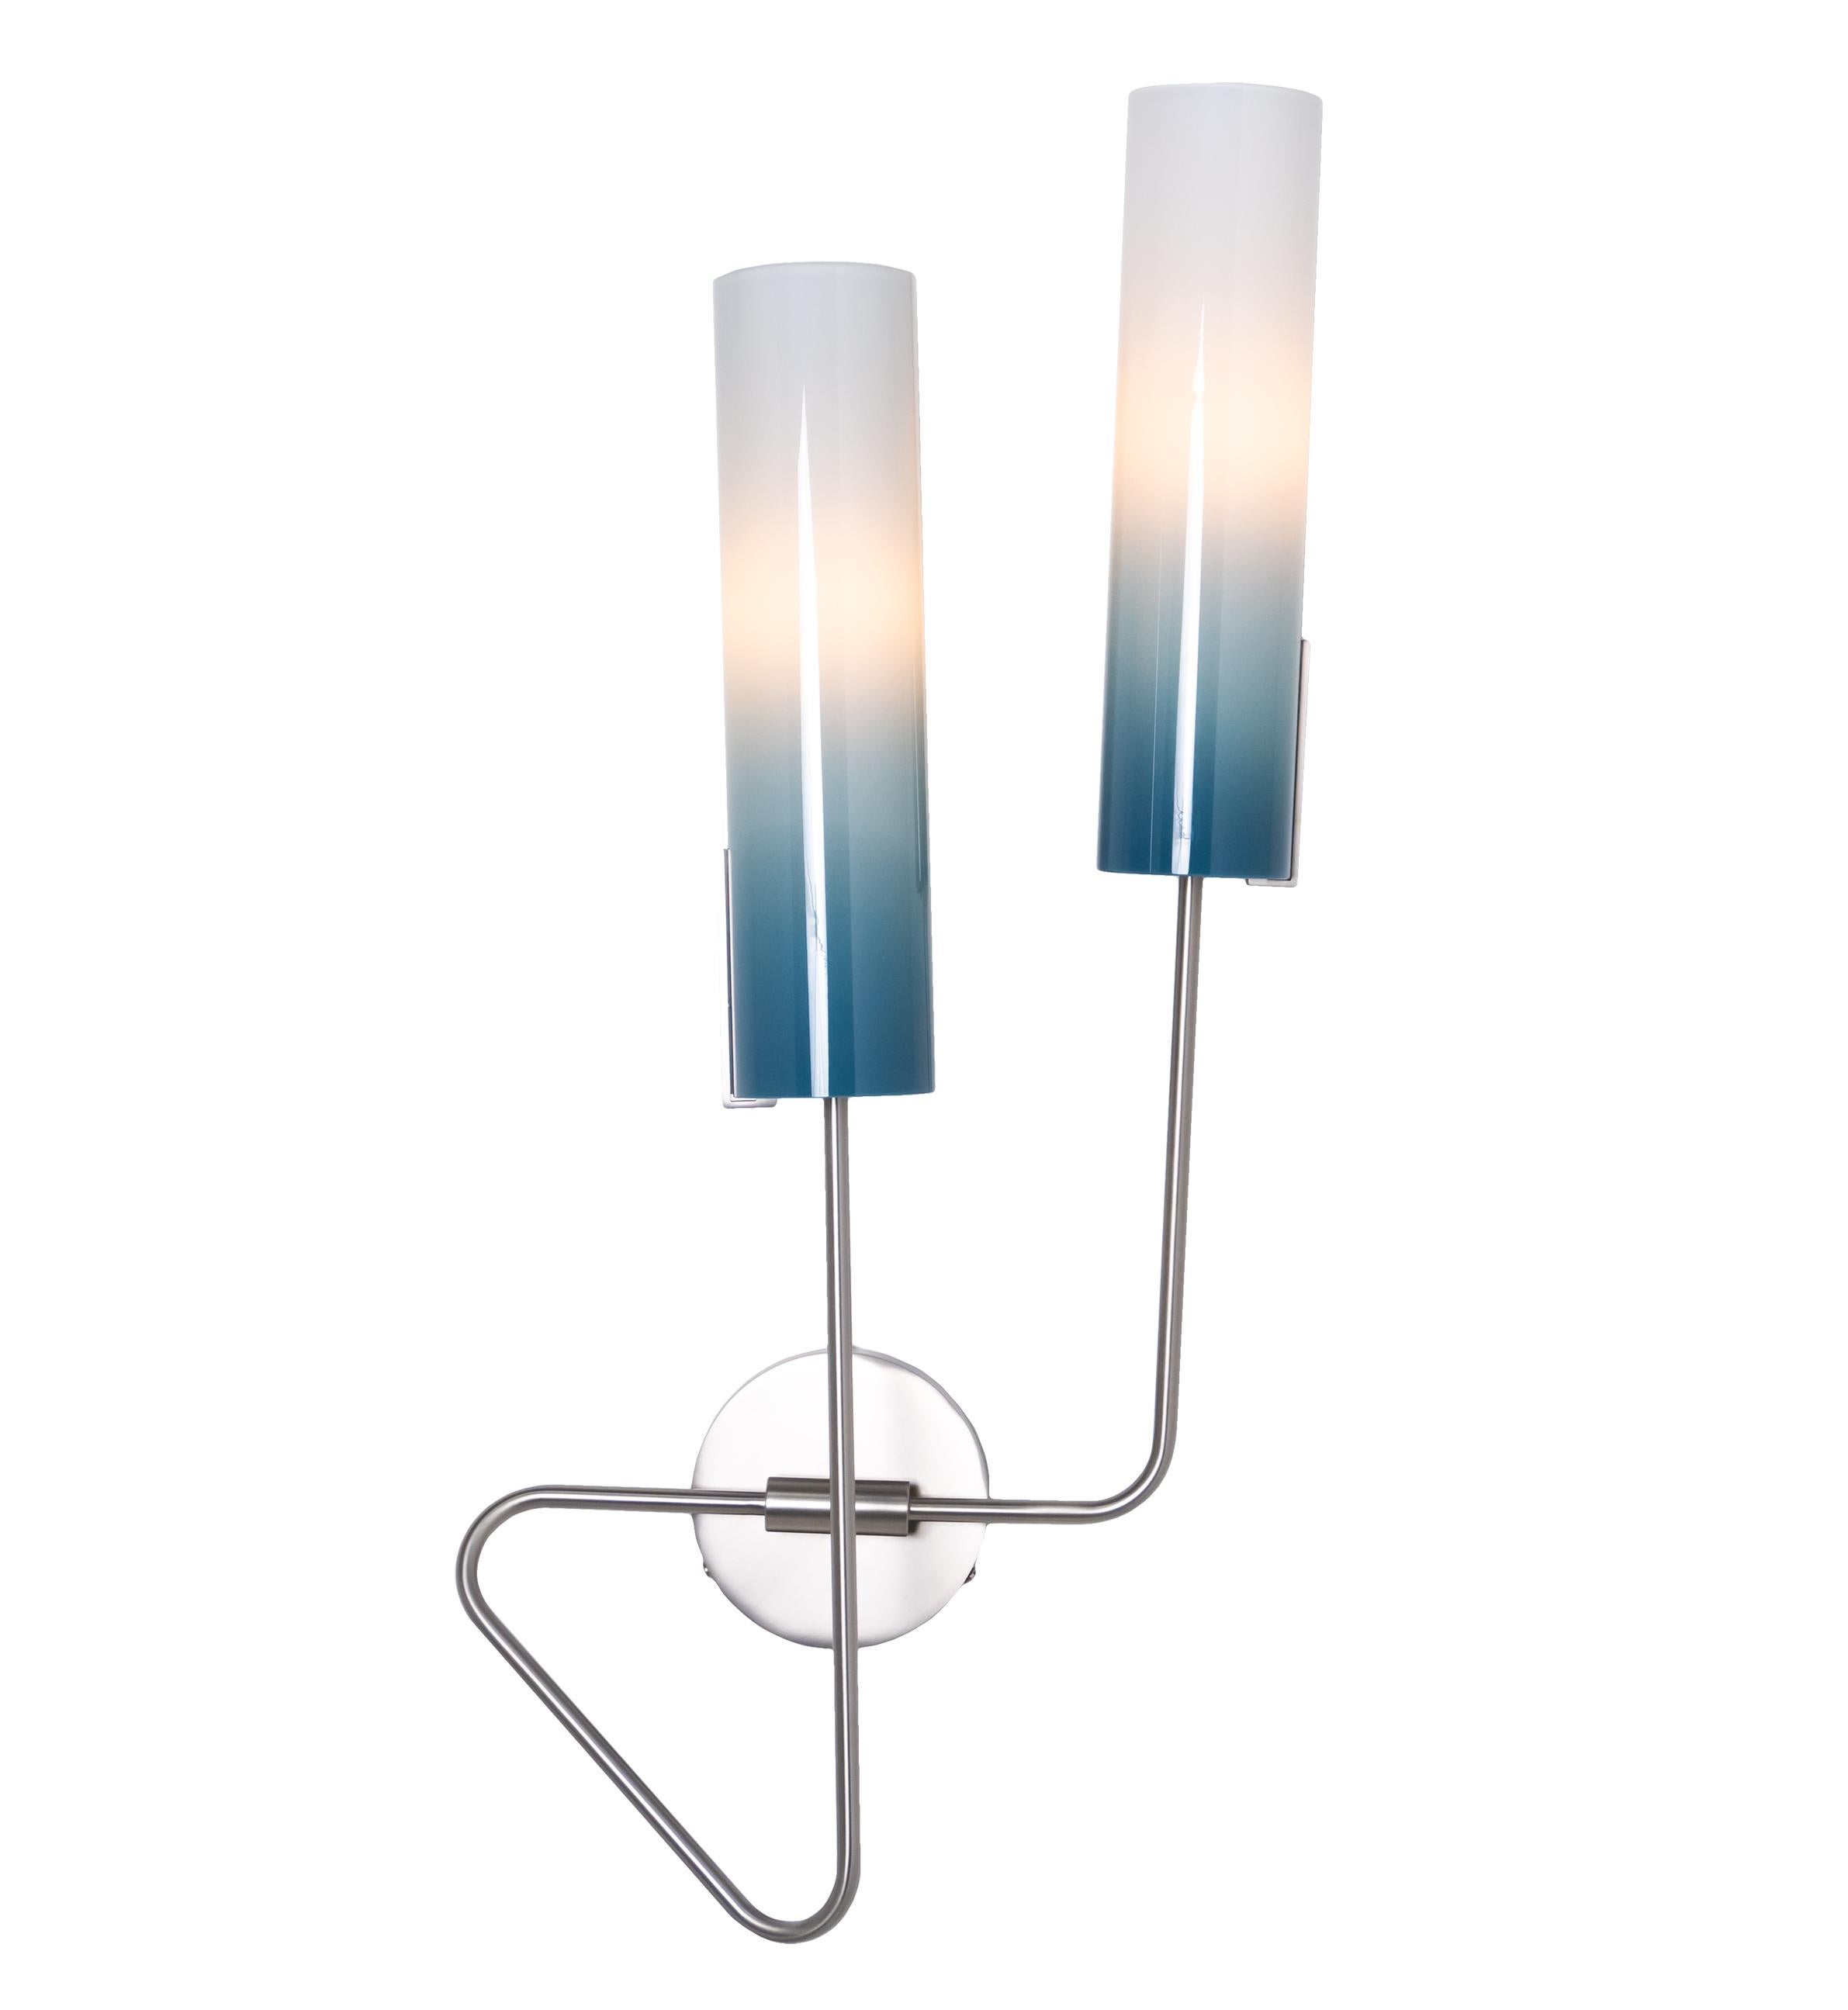 Contemporary Continuum 01 Sconce: Satin Nickel/Charcoal Ombre Shades by Avram Rusu Studio For Sale